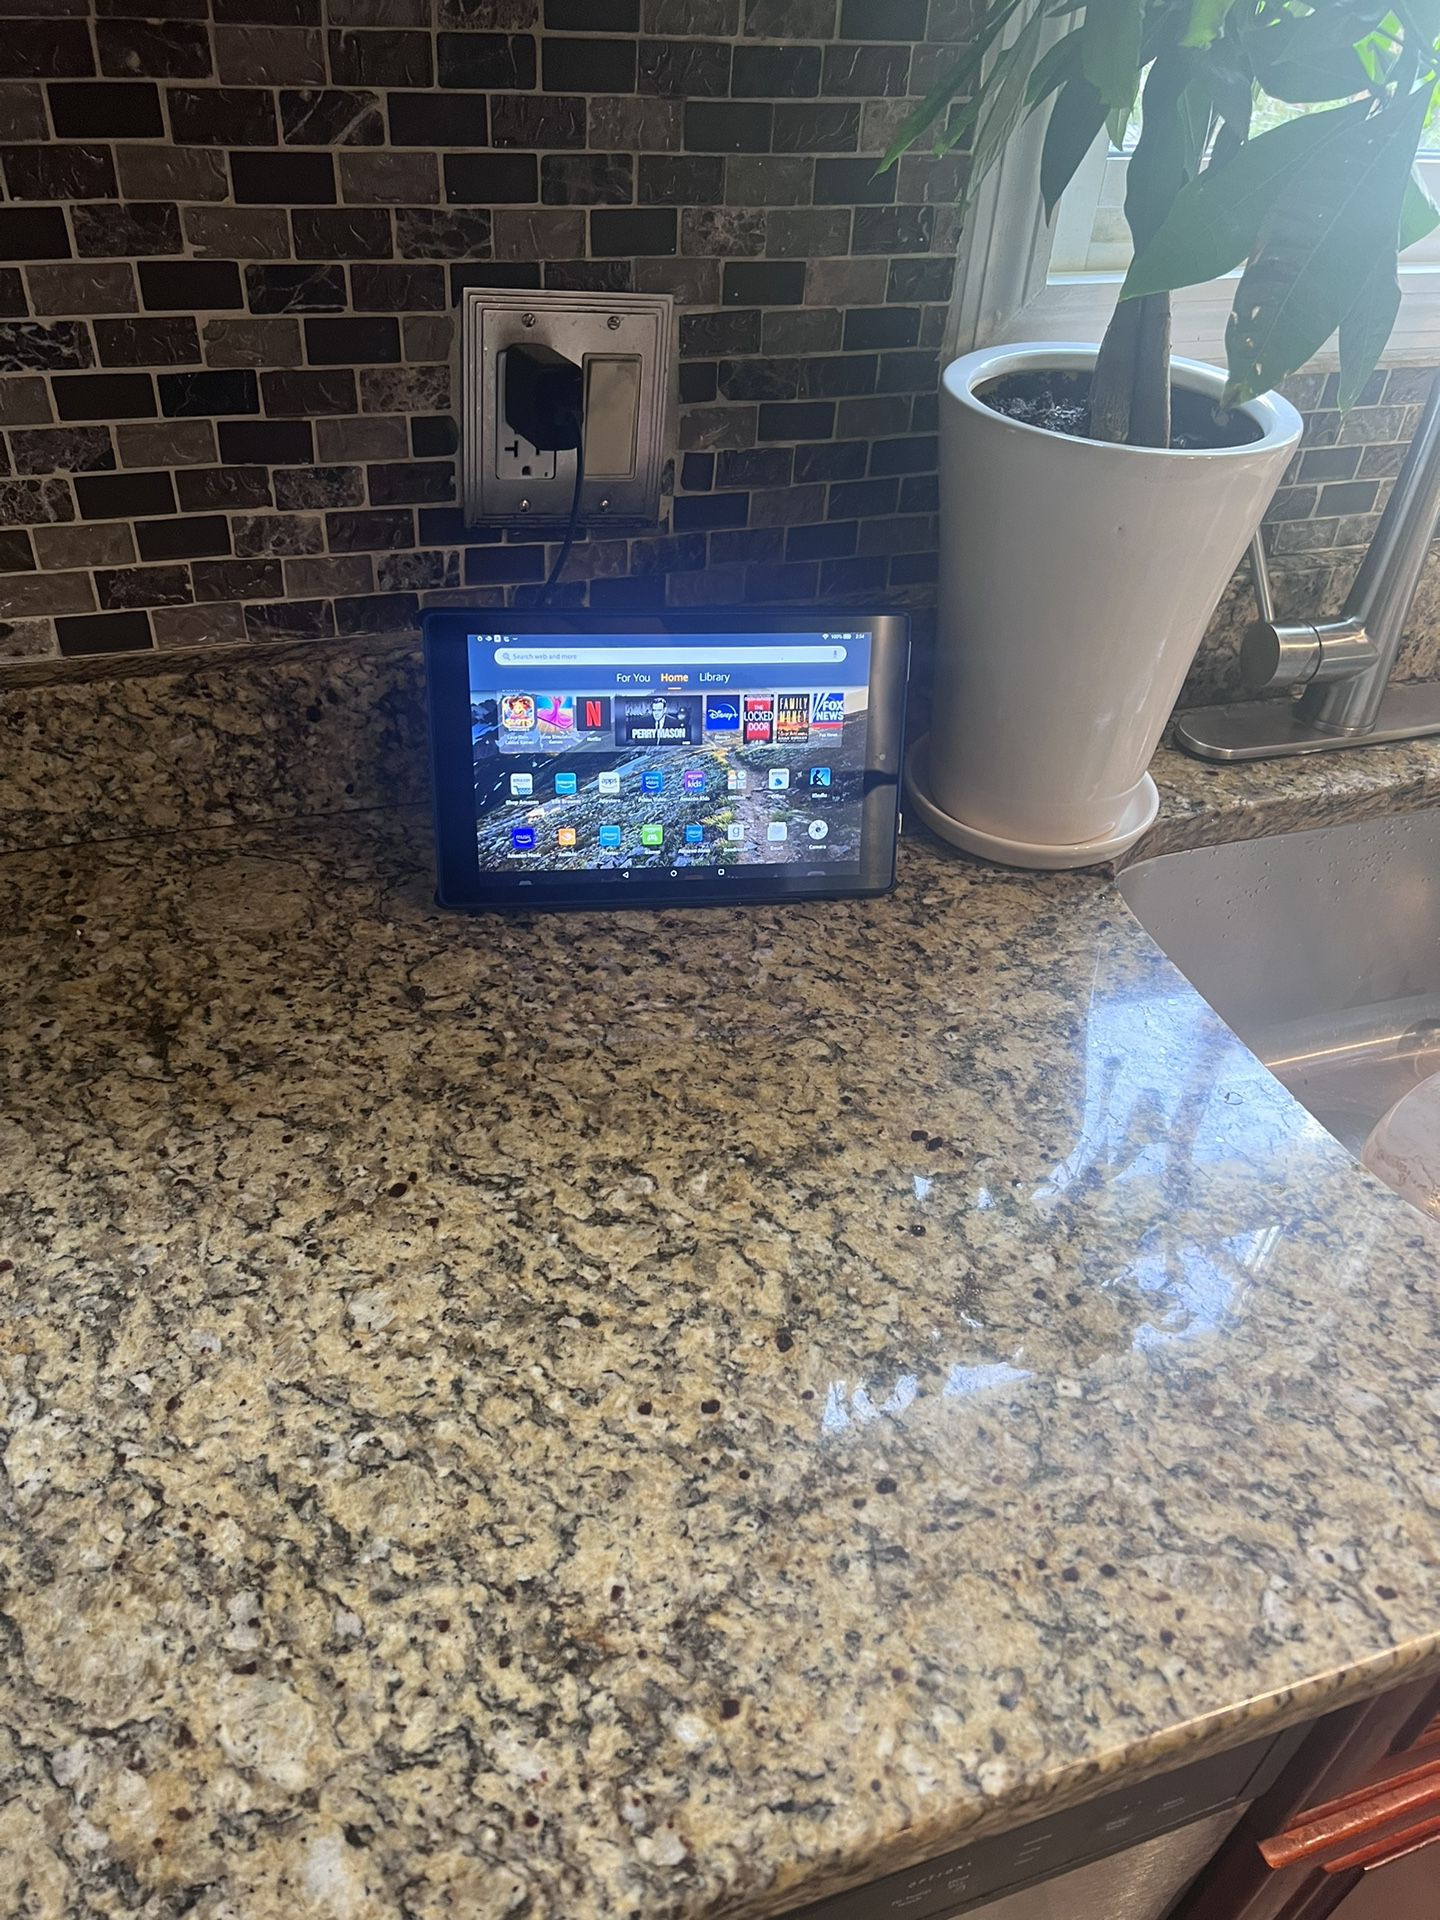 Amazon Fire Tablet 10 + Show mode Dock